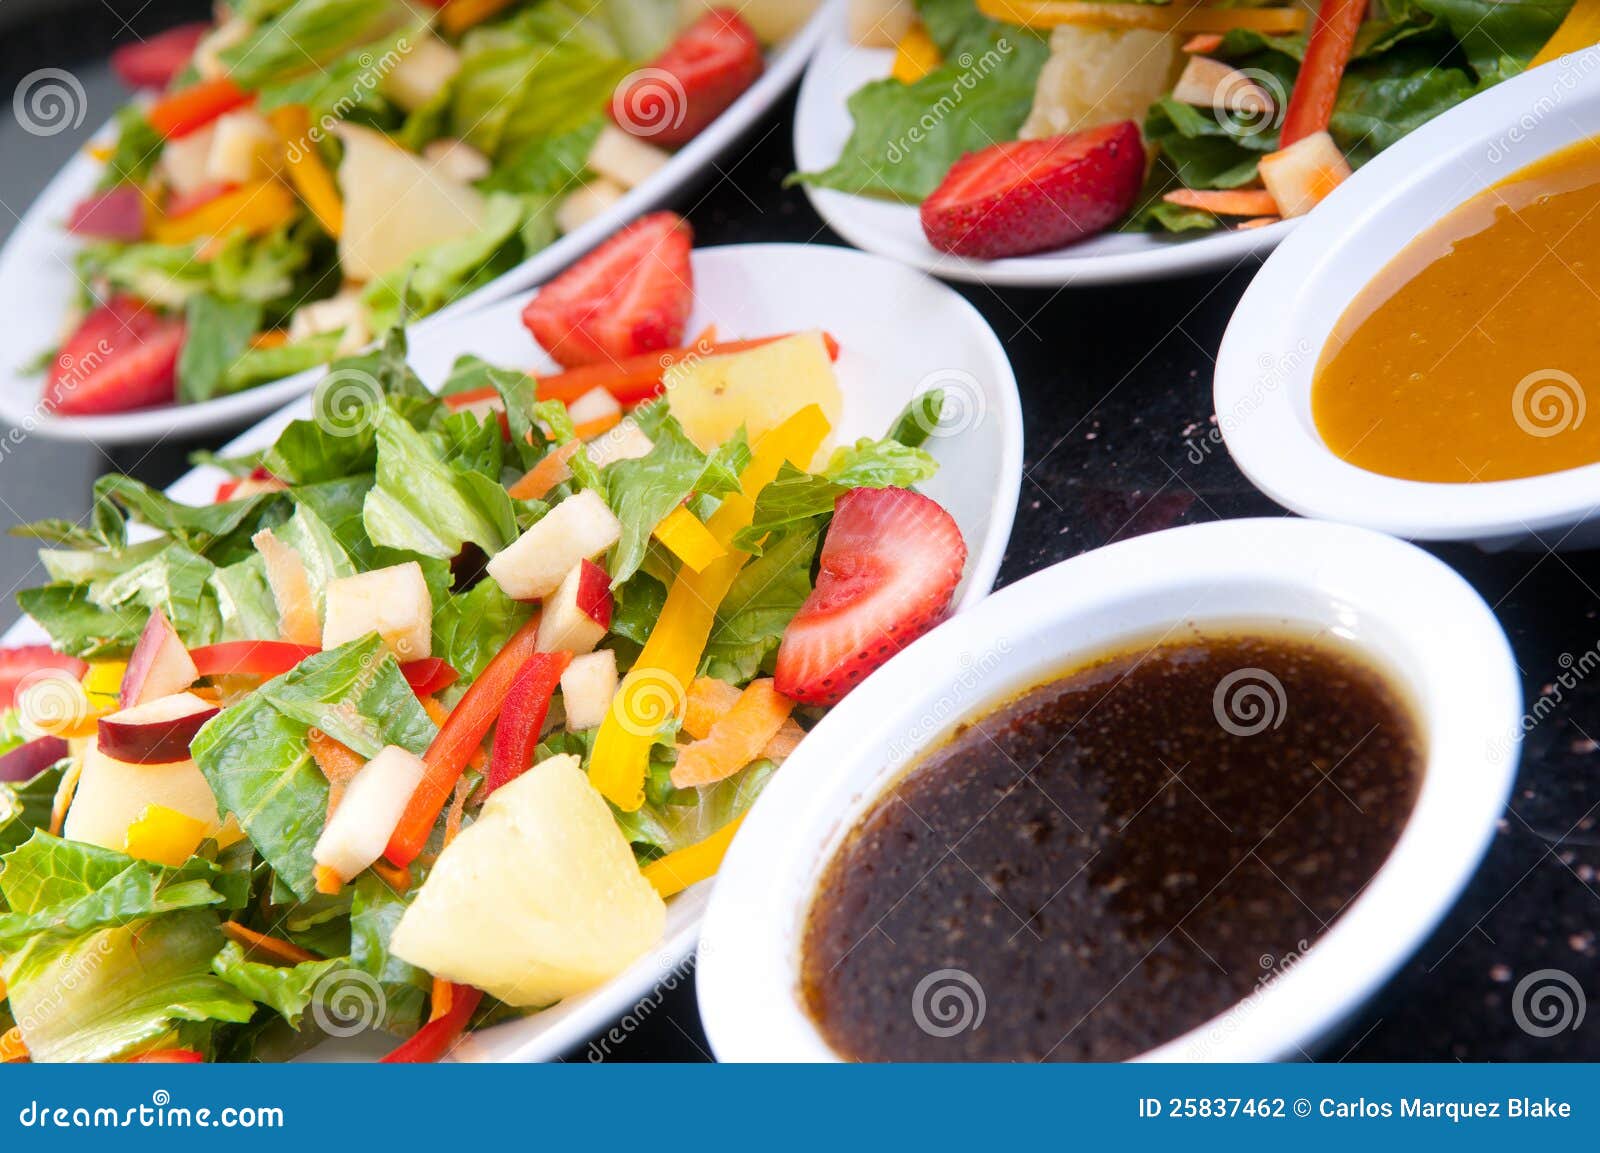 fruit and vegetable salads